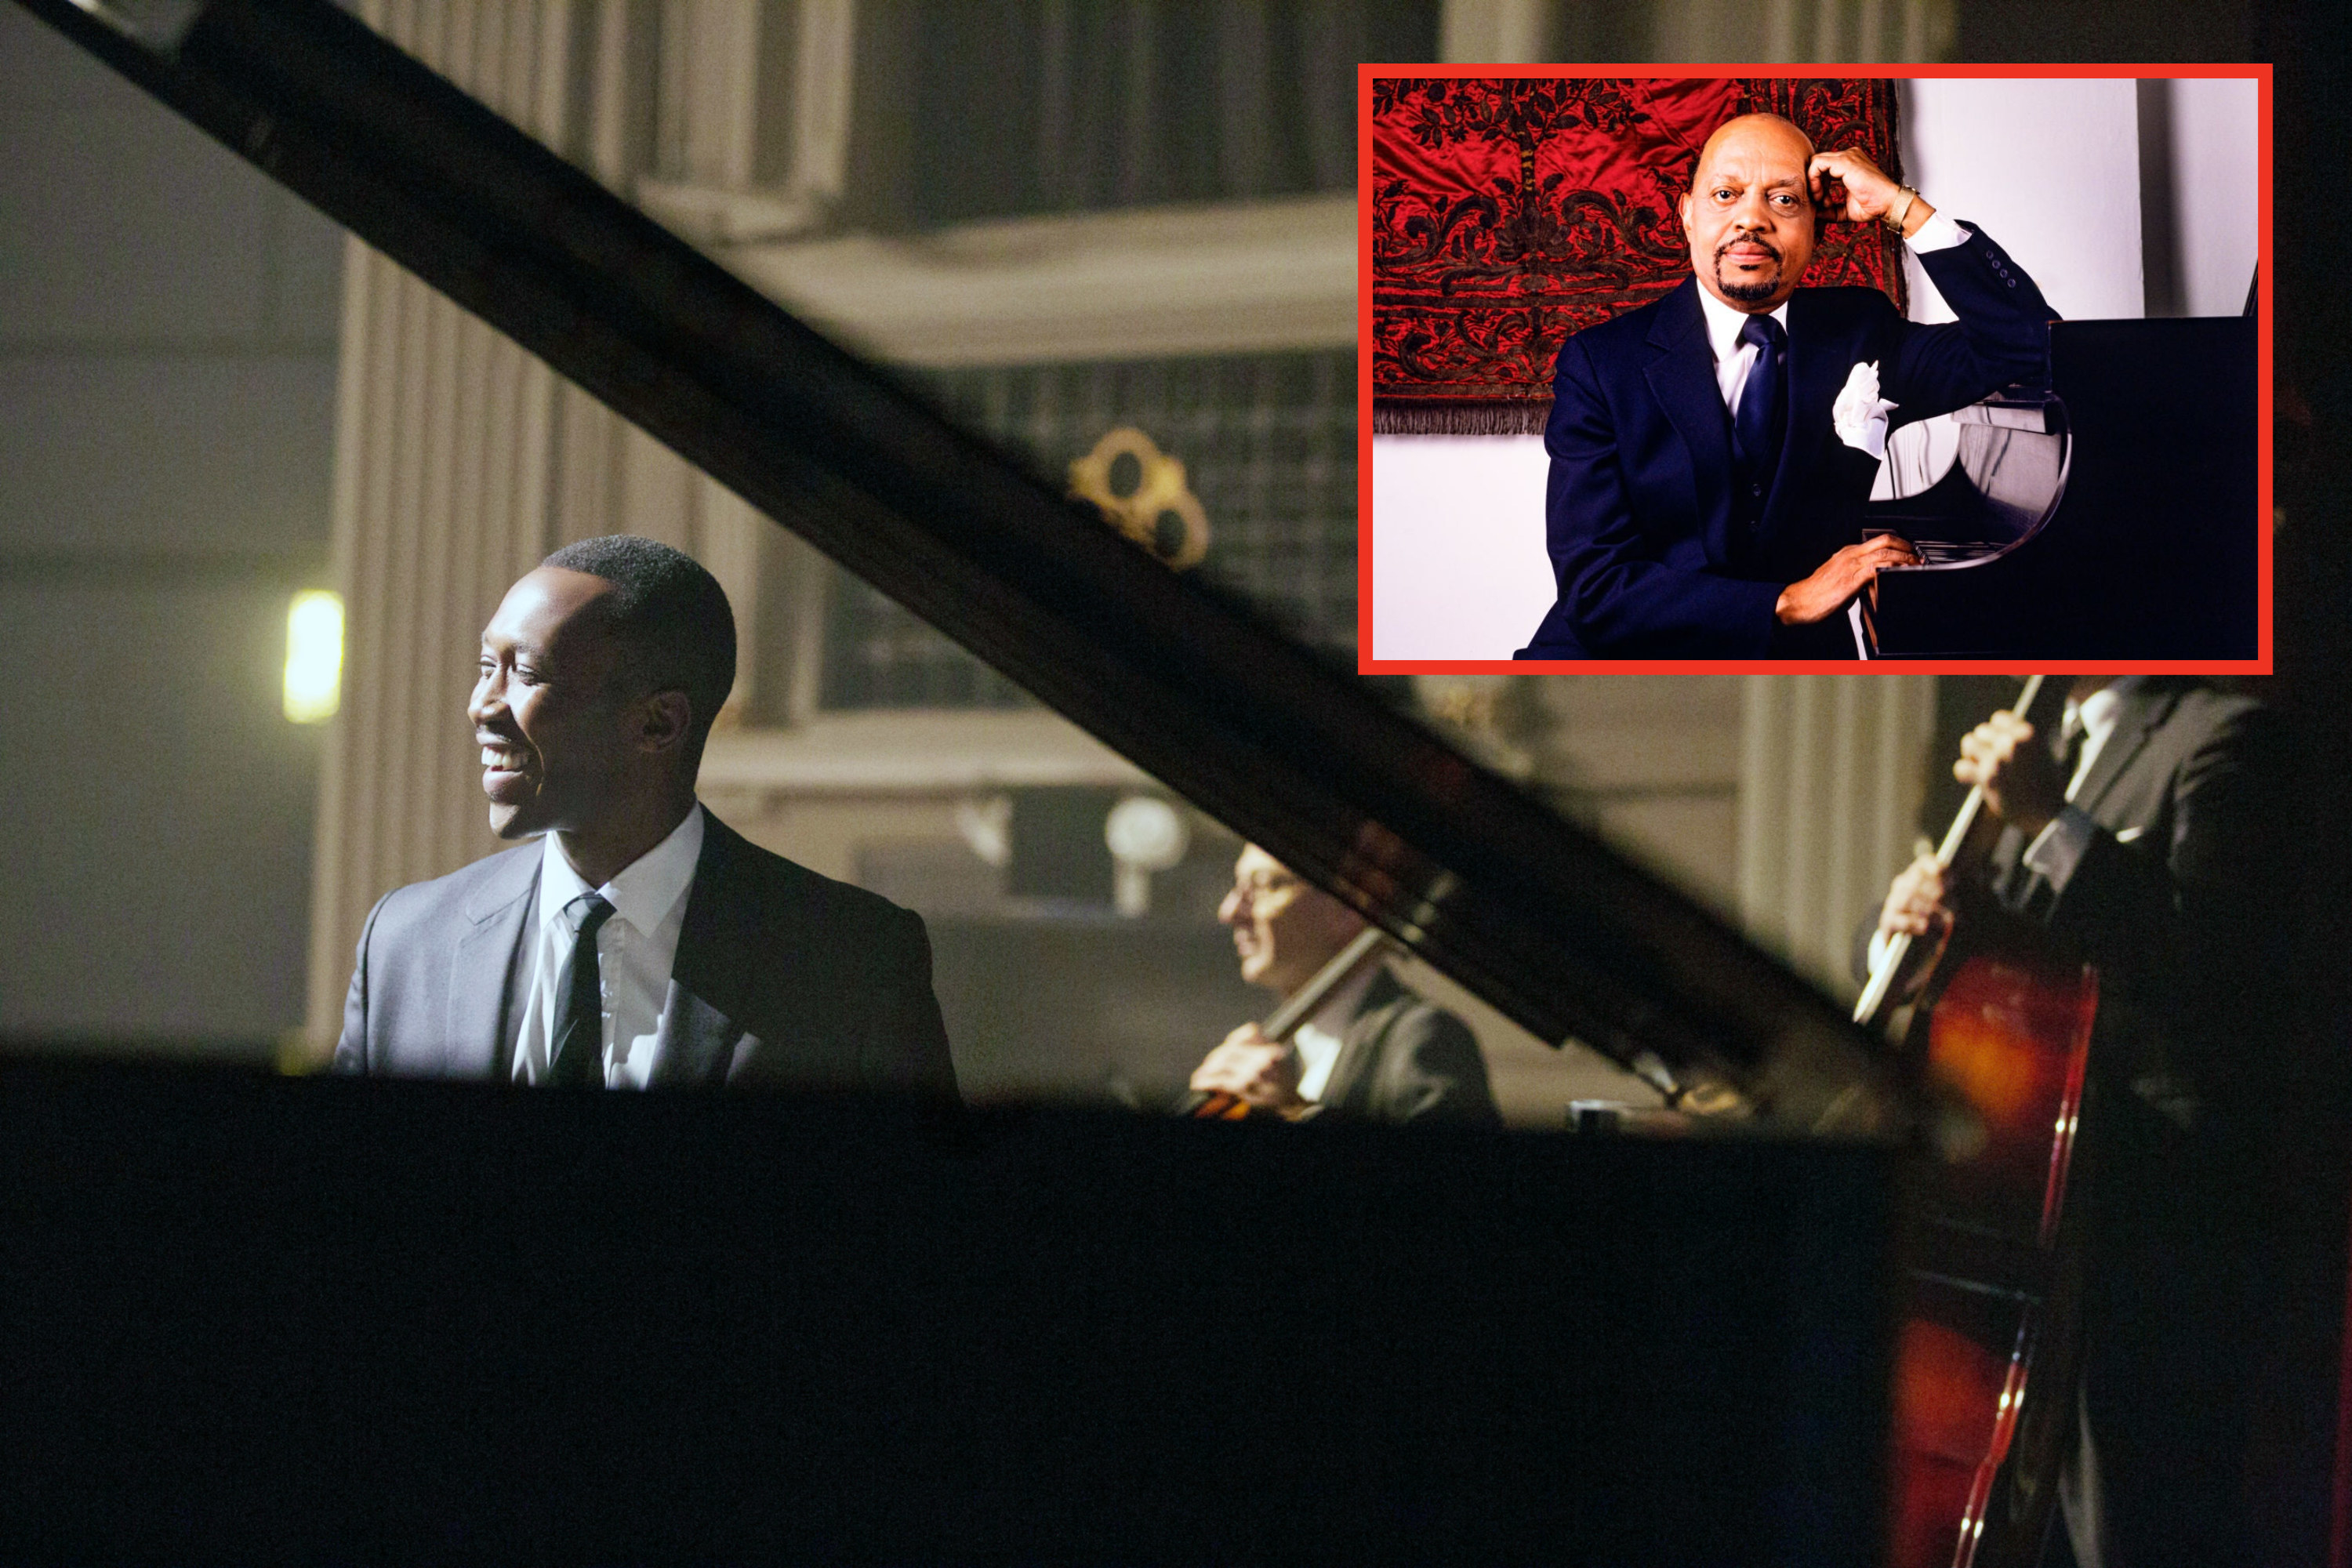 Mahershala Ali as Don Shirley plays the piano in &quot;The Green Book&quot;